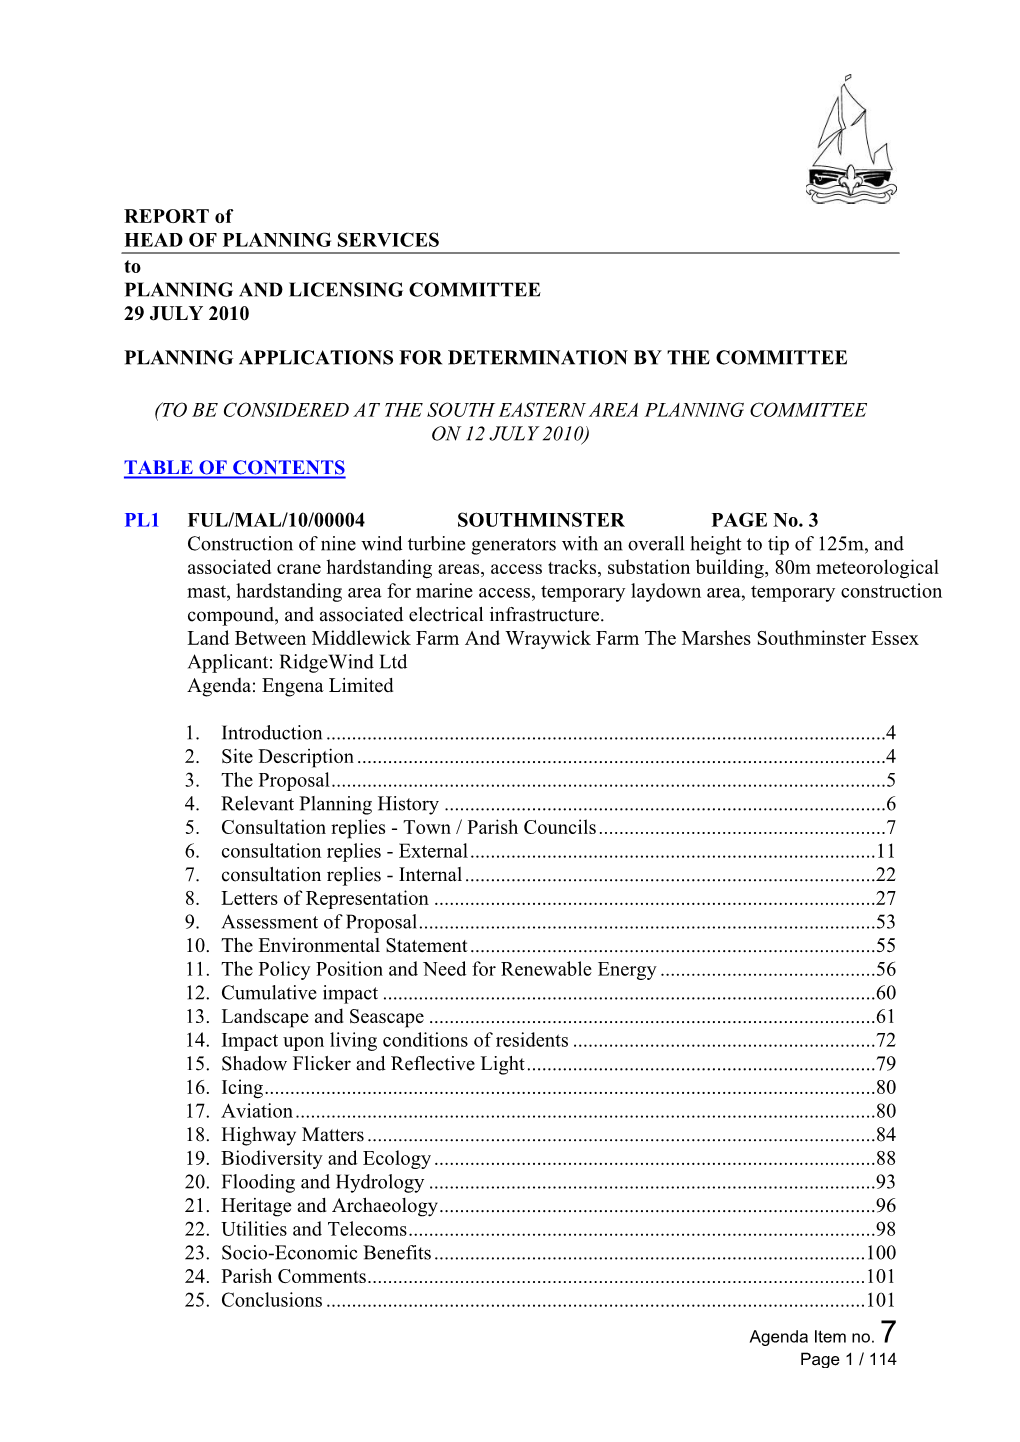 REPORT of HEAD of PLANNING SERVICES to PLANNING and LICENSING COMMITTEE 29 JULY 2010